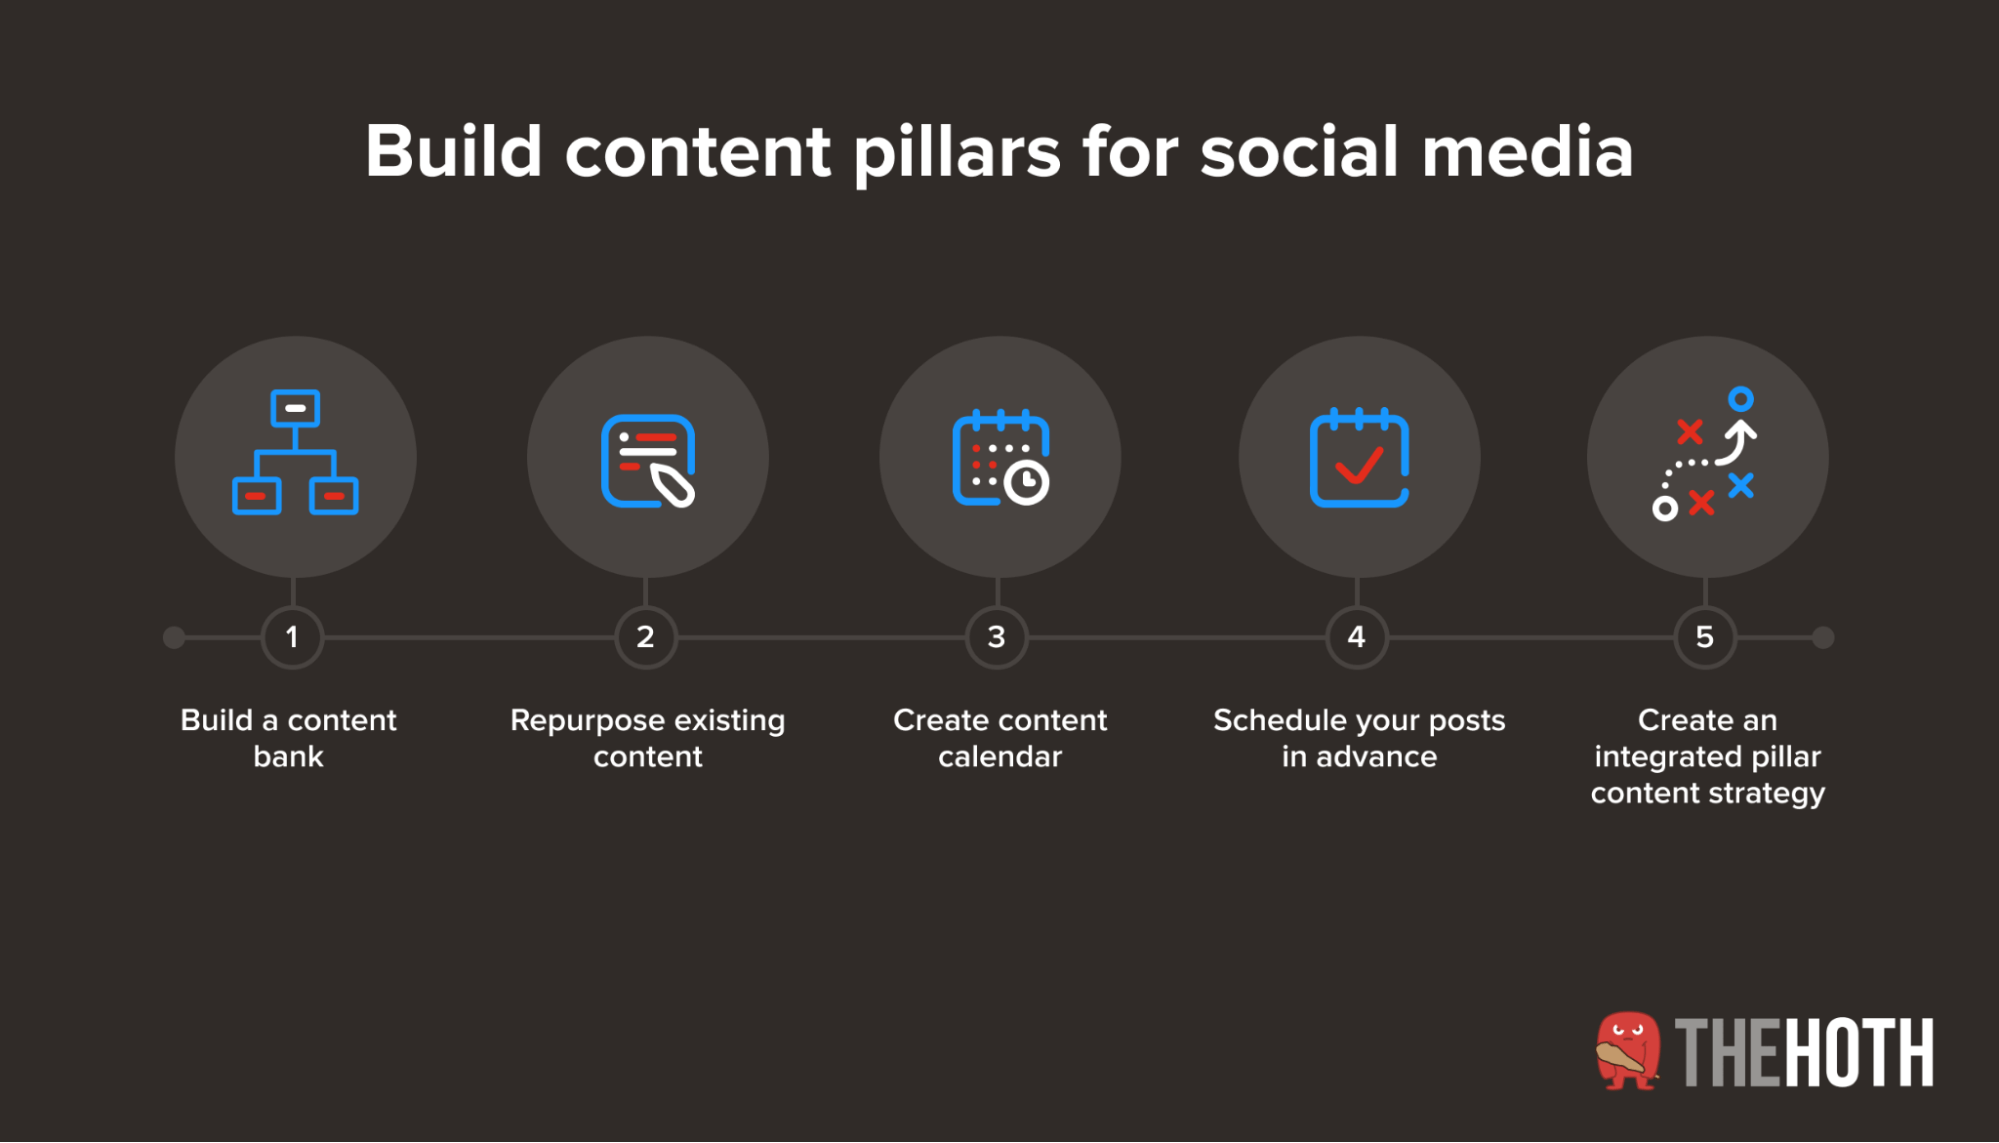 The steps to develop a pillar content strategy for social media